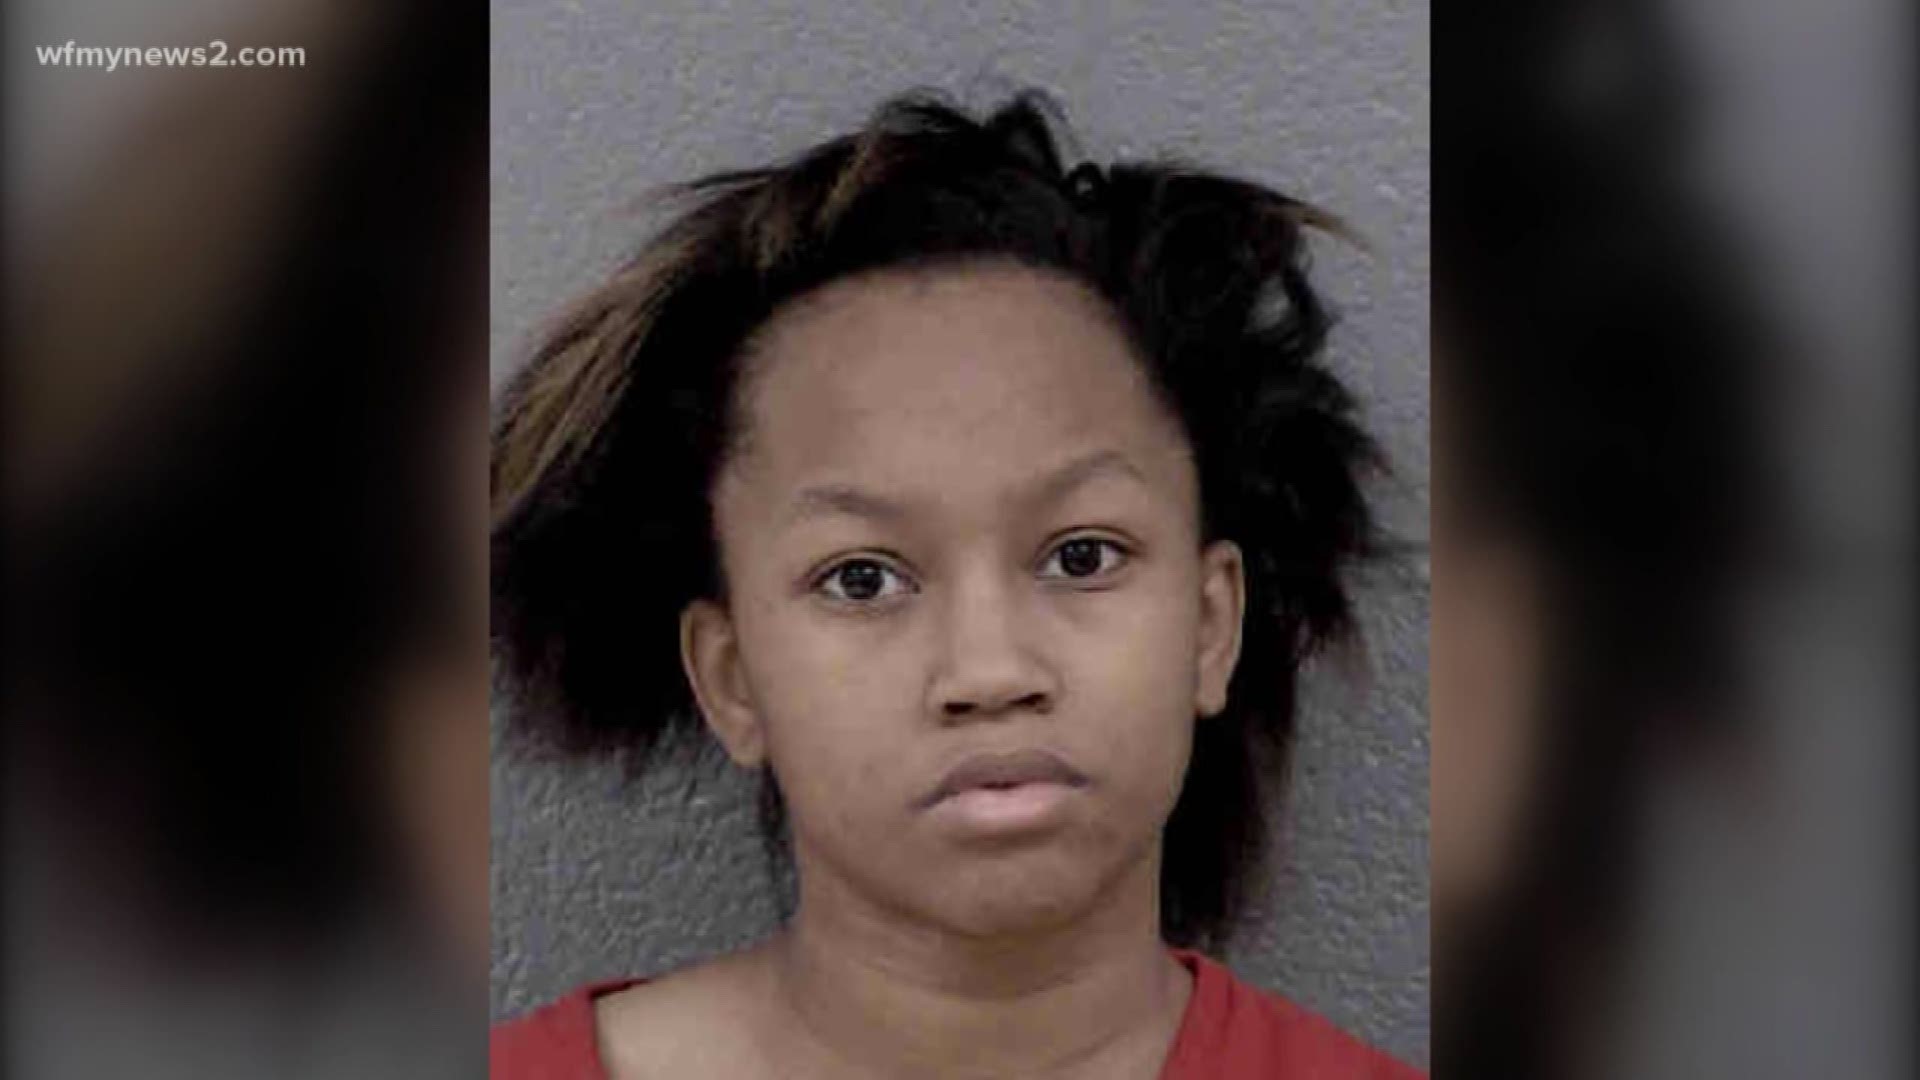 Police say this isn't the first time she was arrested this year, now she faces several charges